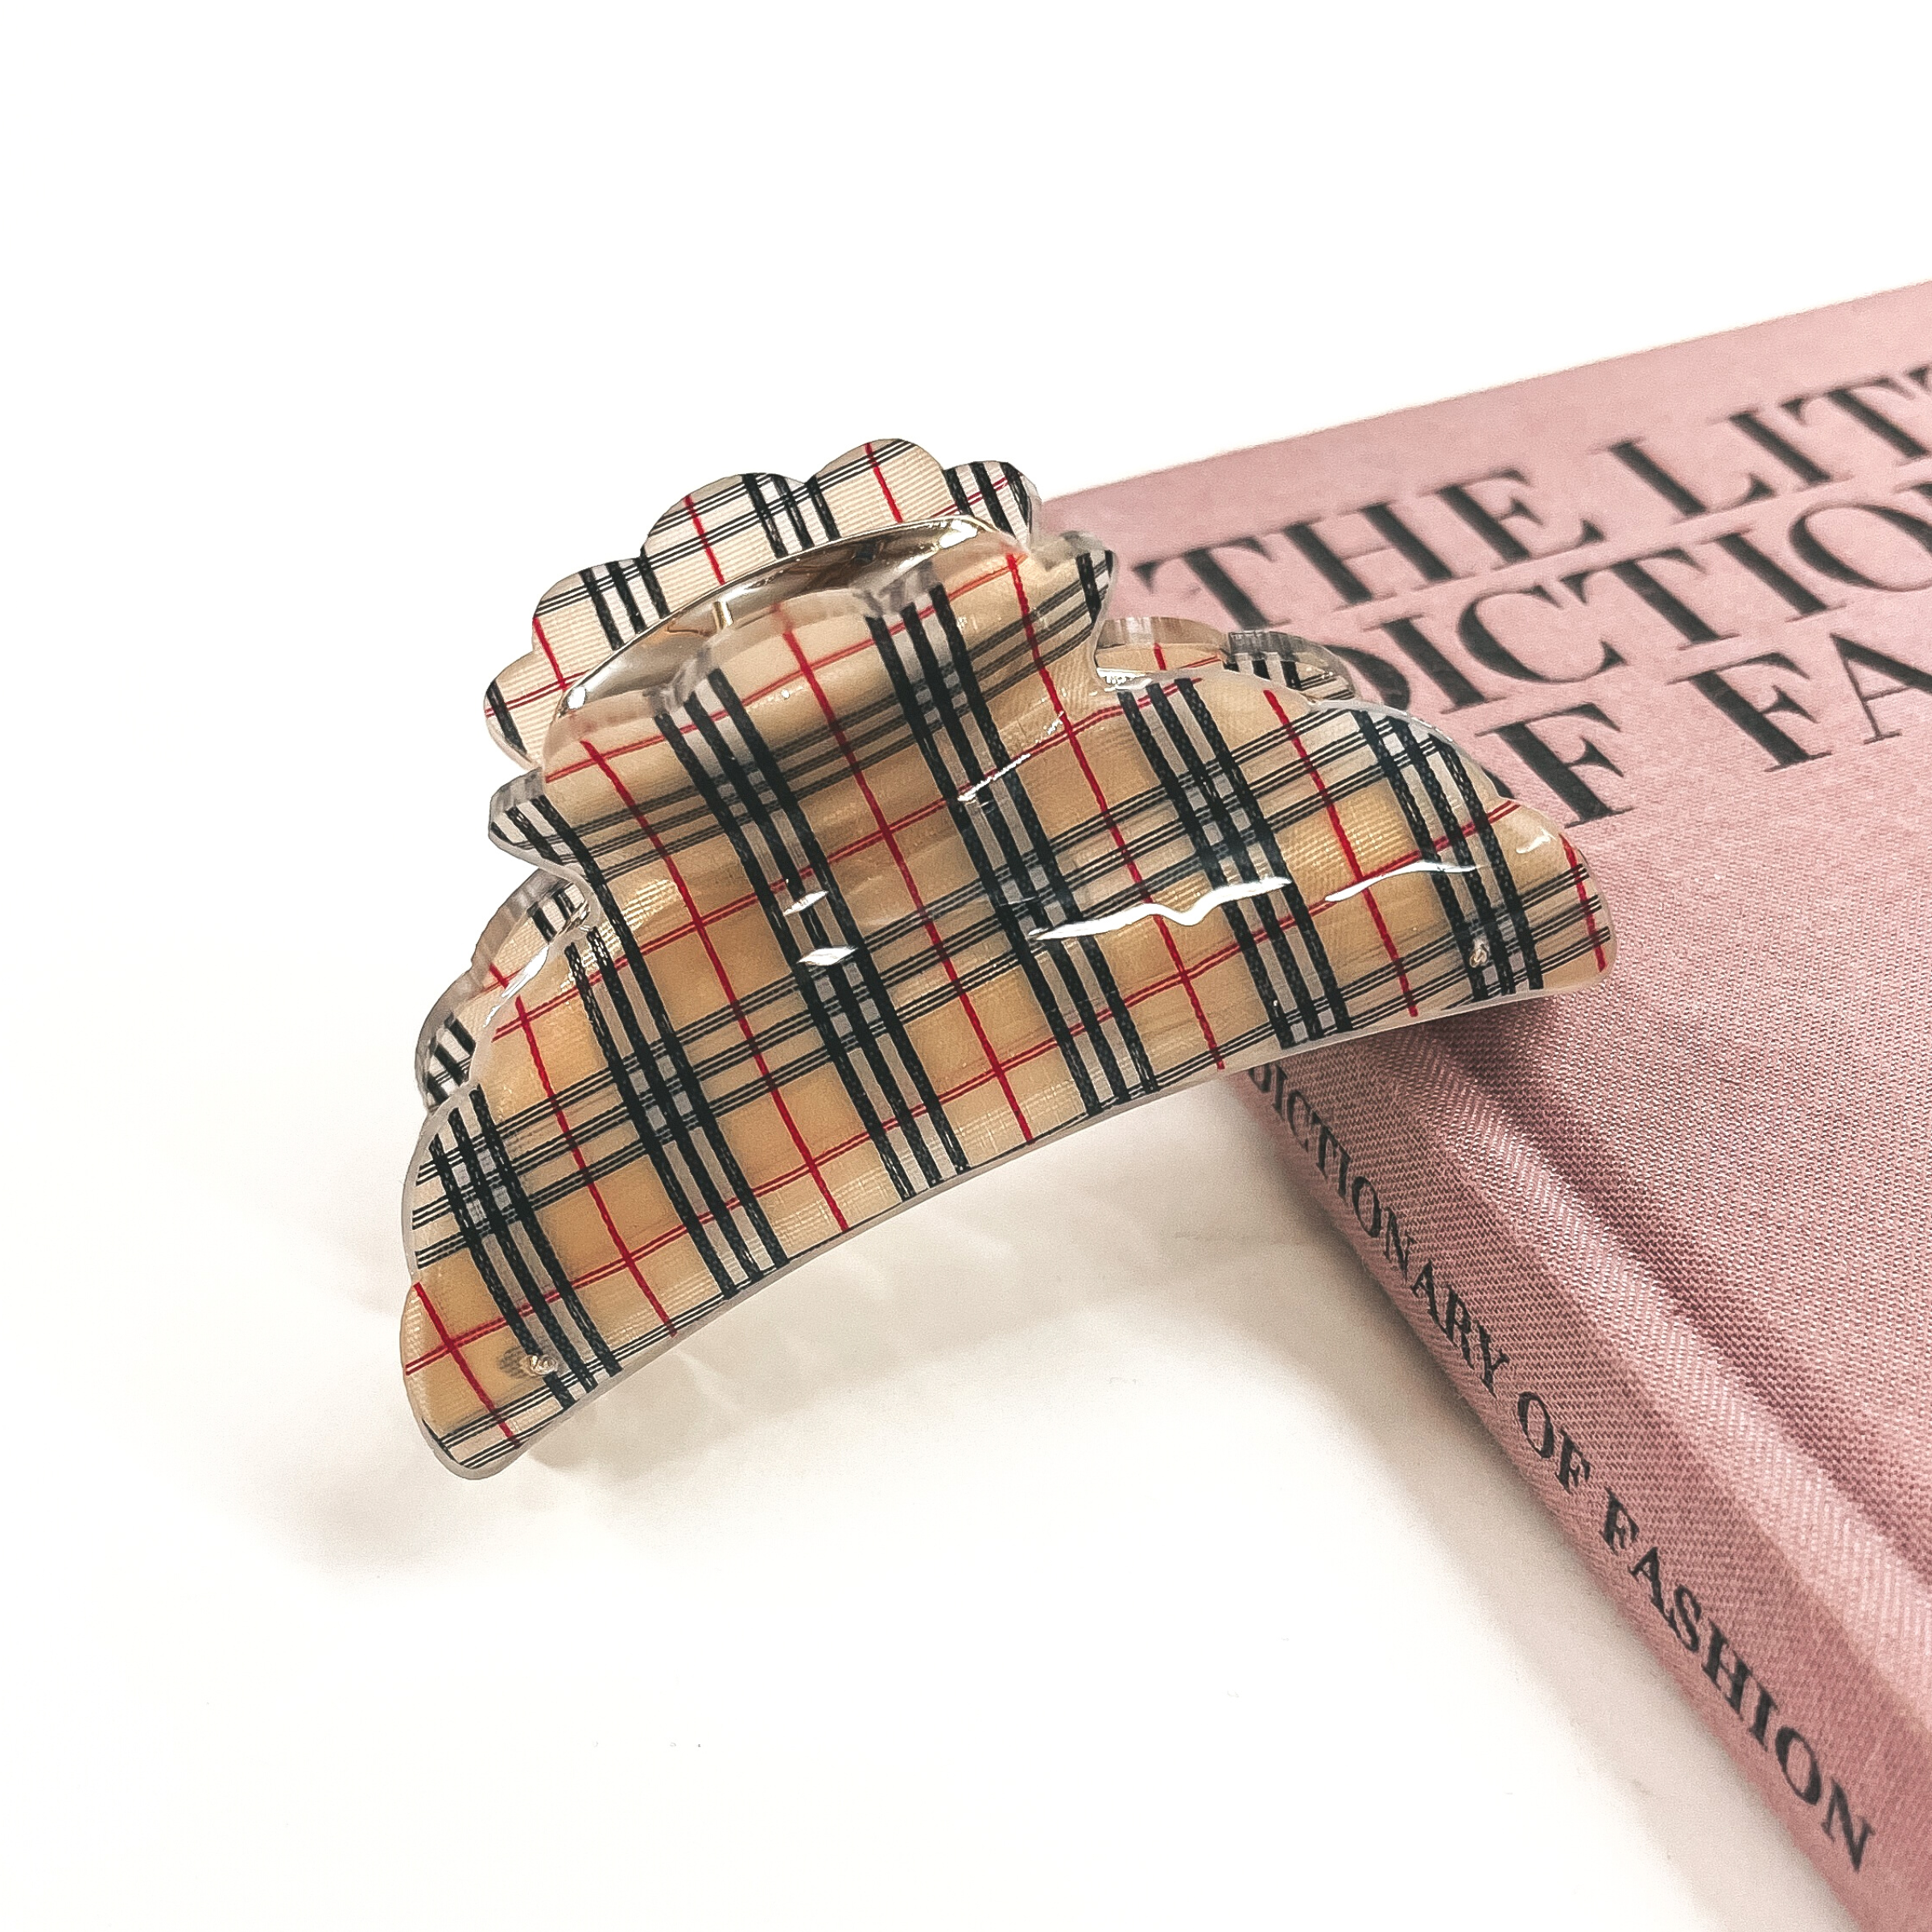 This is a gold and tan plaid print hair clip laying on the side of a pink book and white background.